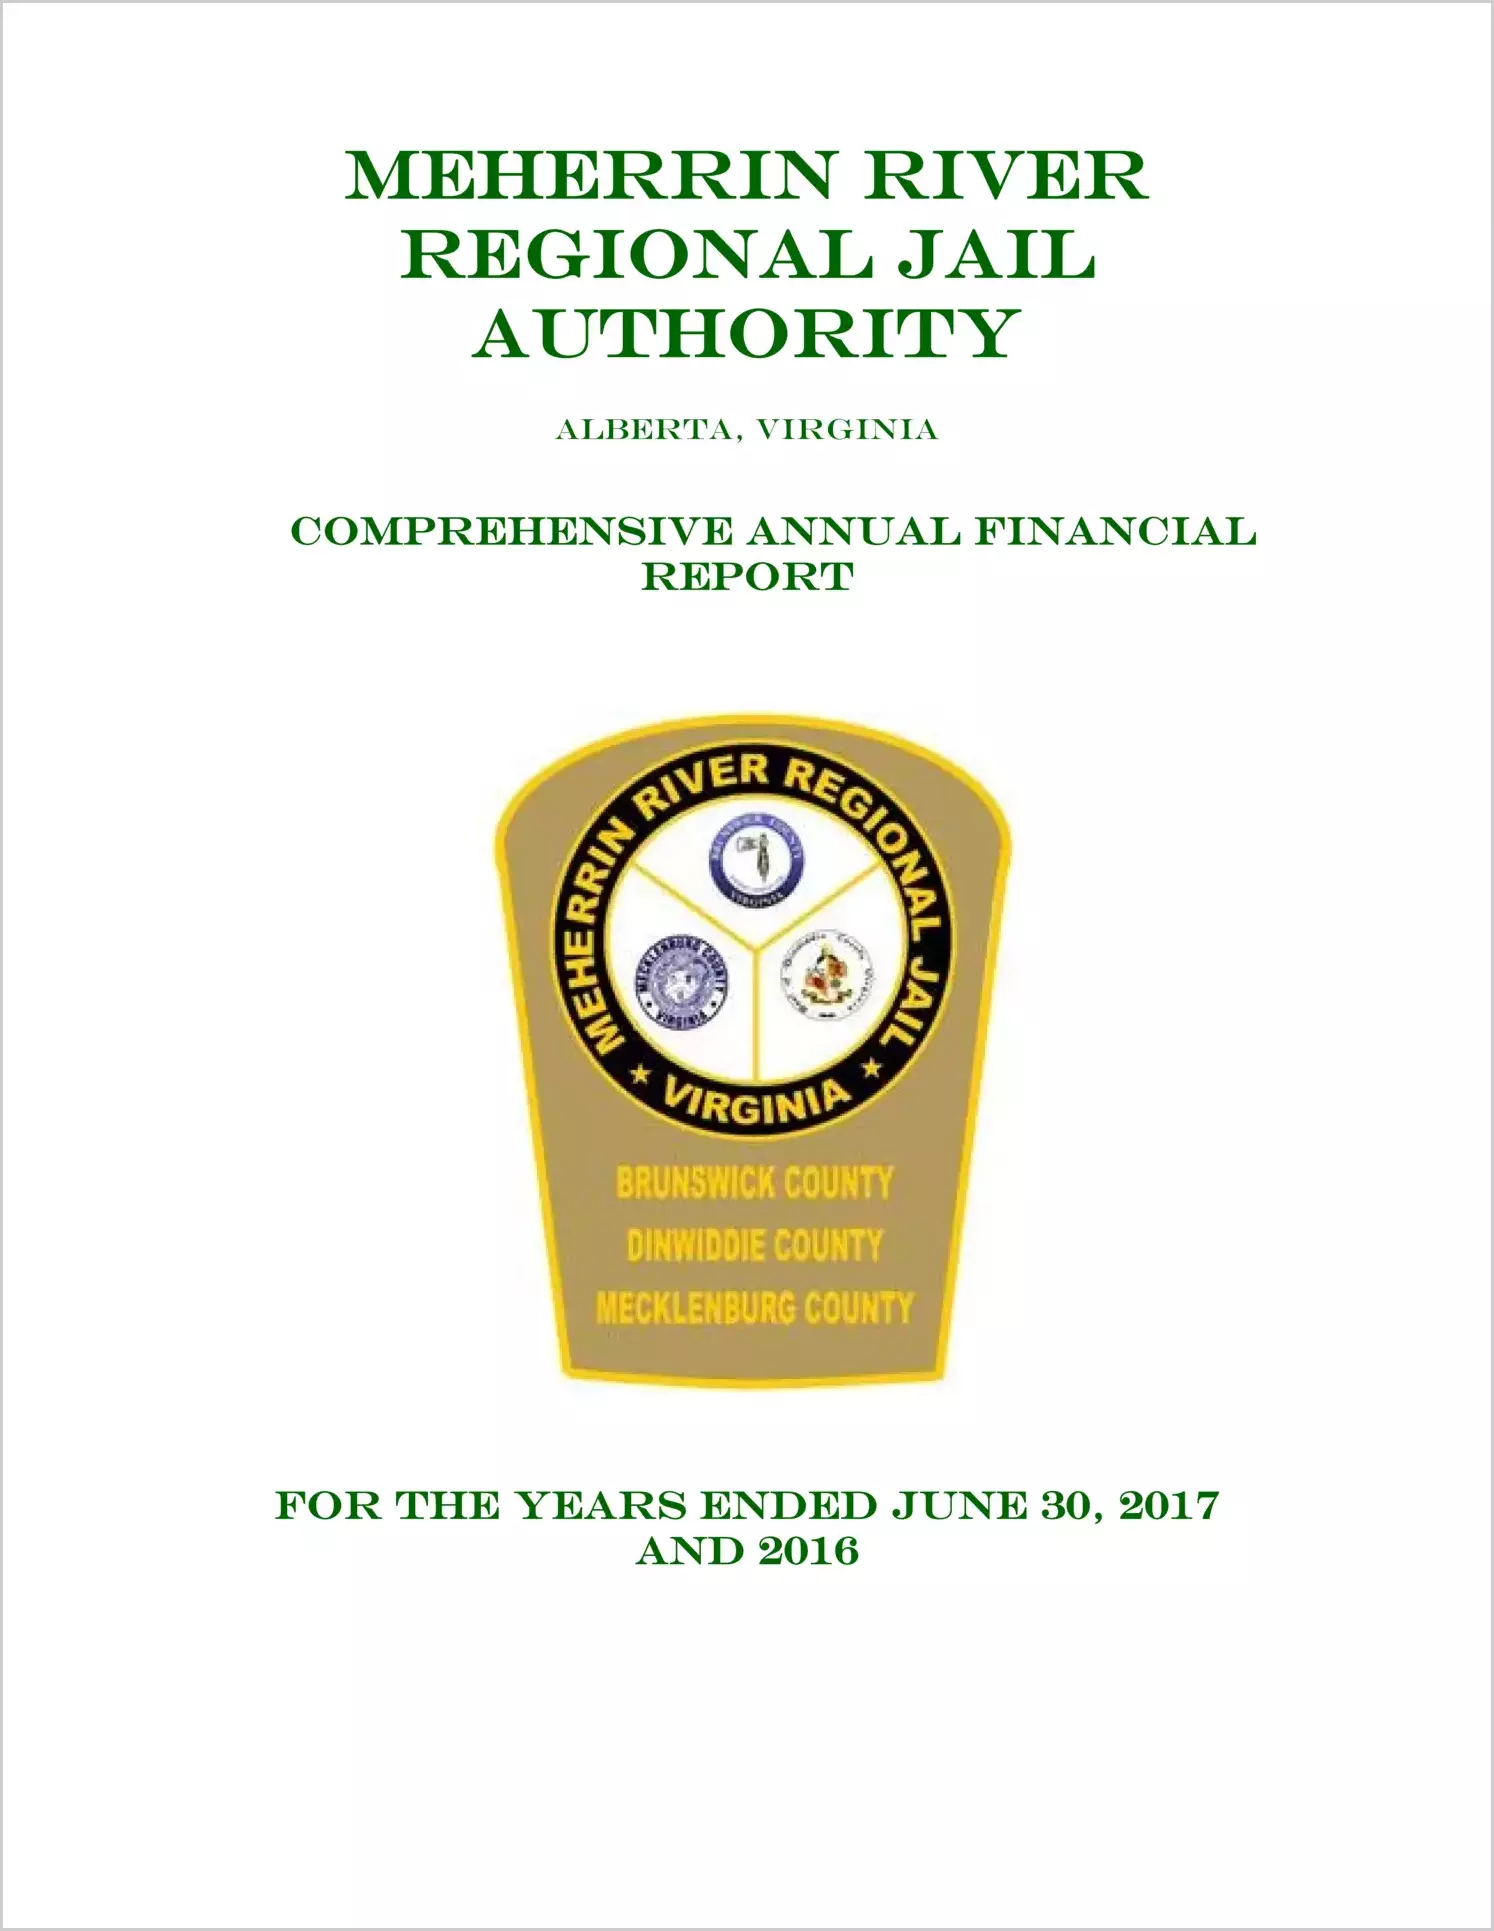 2017 ABC/Other Annual Financial Report  for Meherrin River Regional Jail Authority